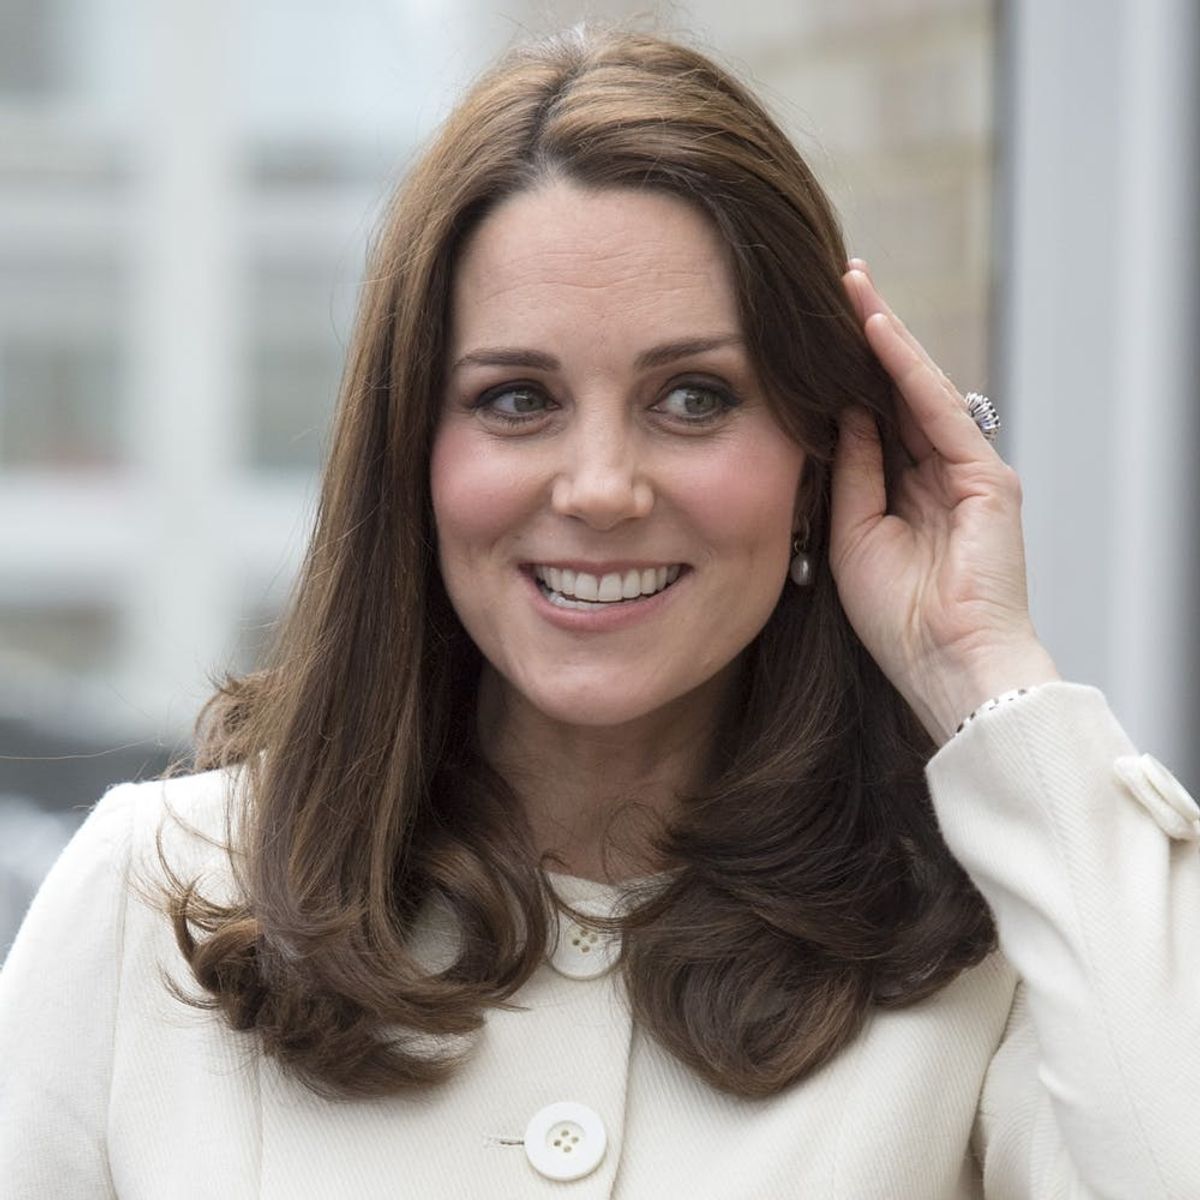 Here’s Where You Can Snag Kate Middleton’s Cream Maternity Coat for Under $100